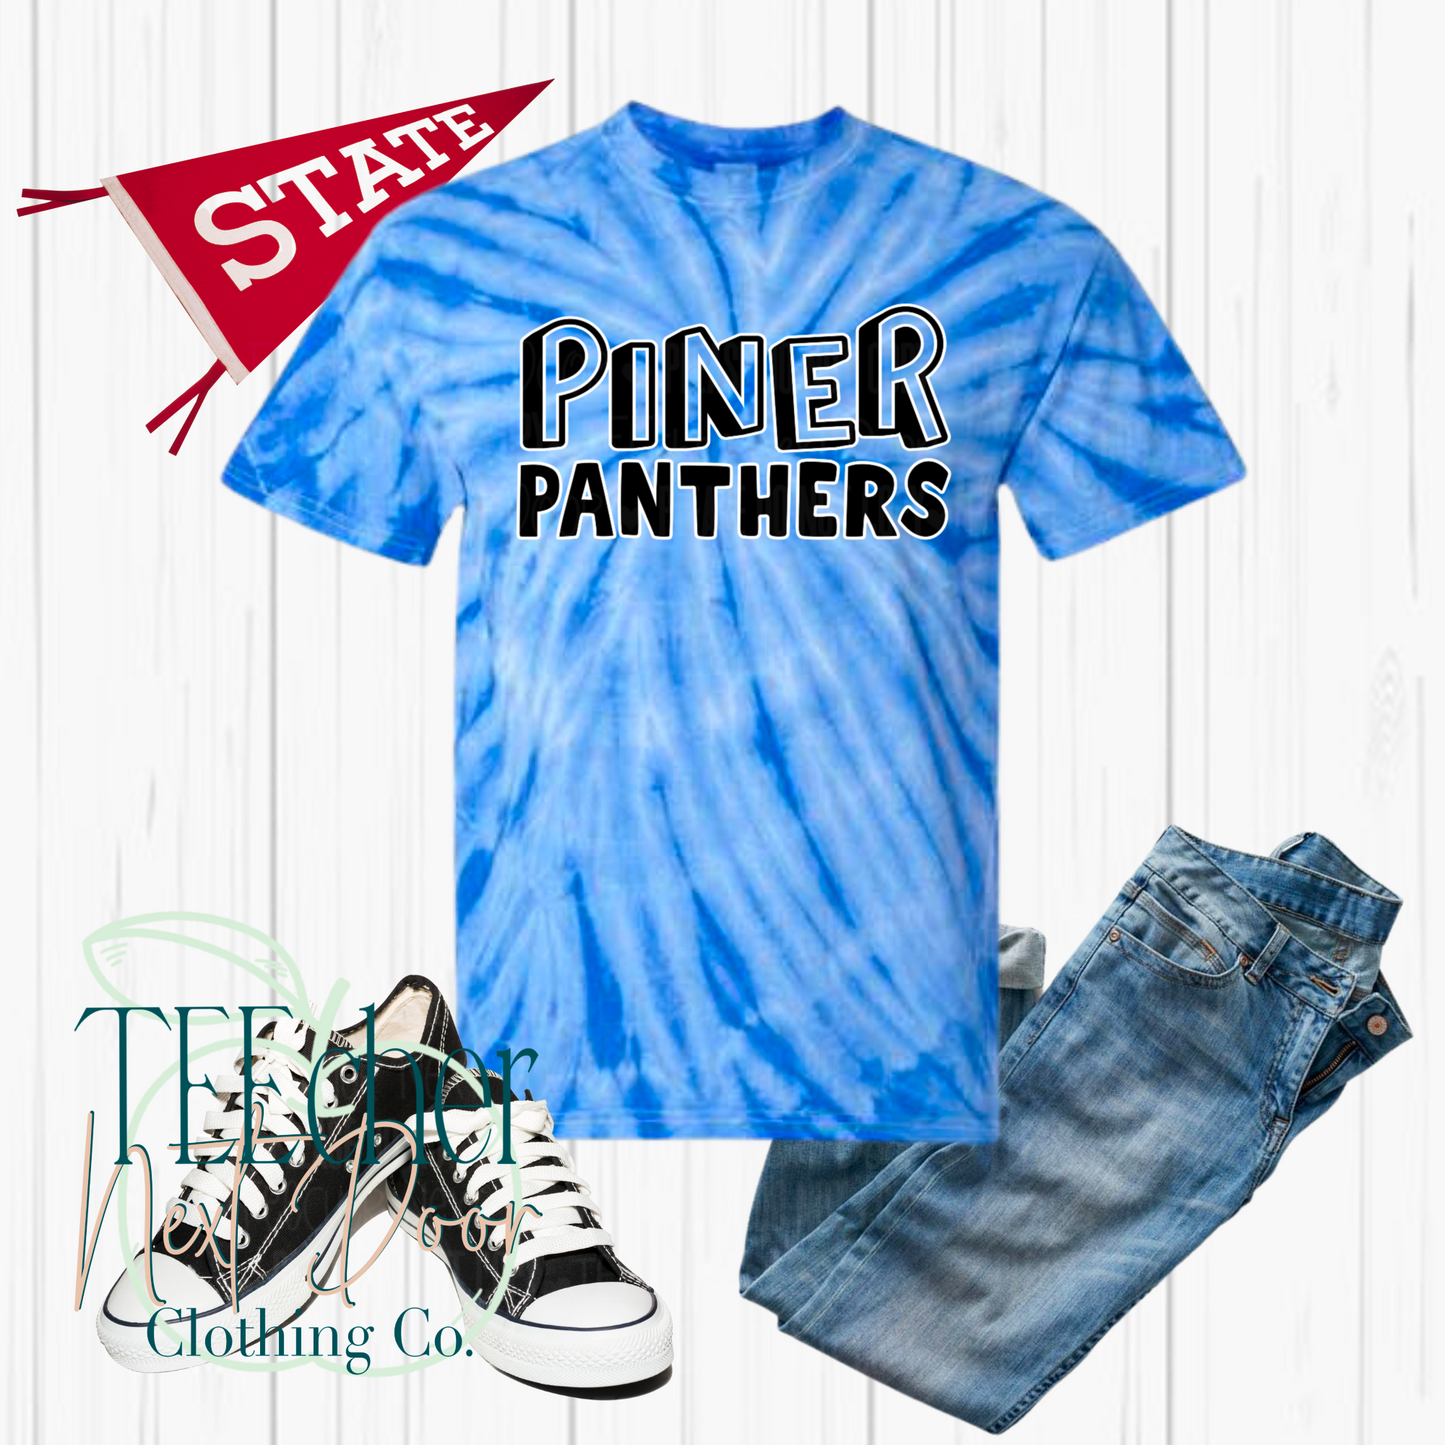 Piner Panthers Simple and Fun